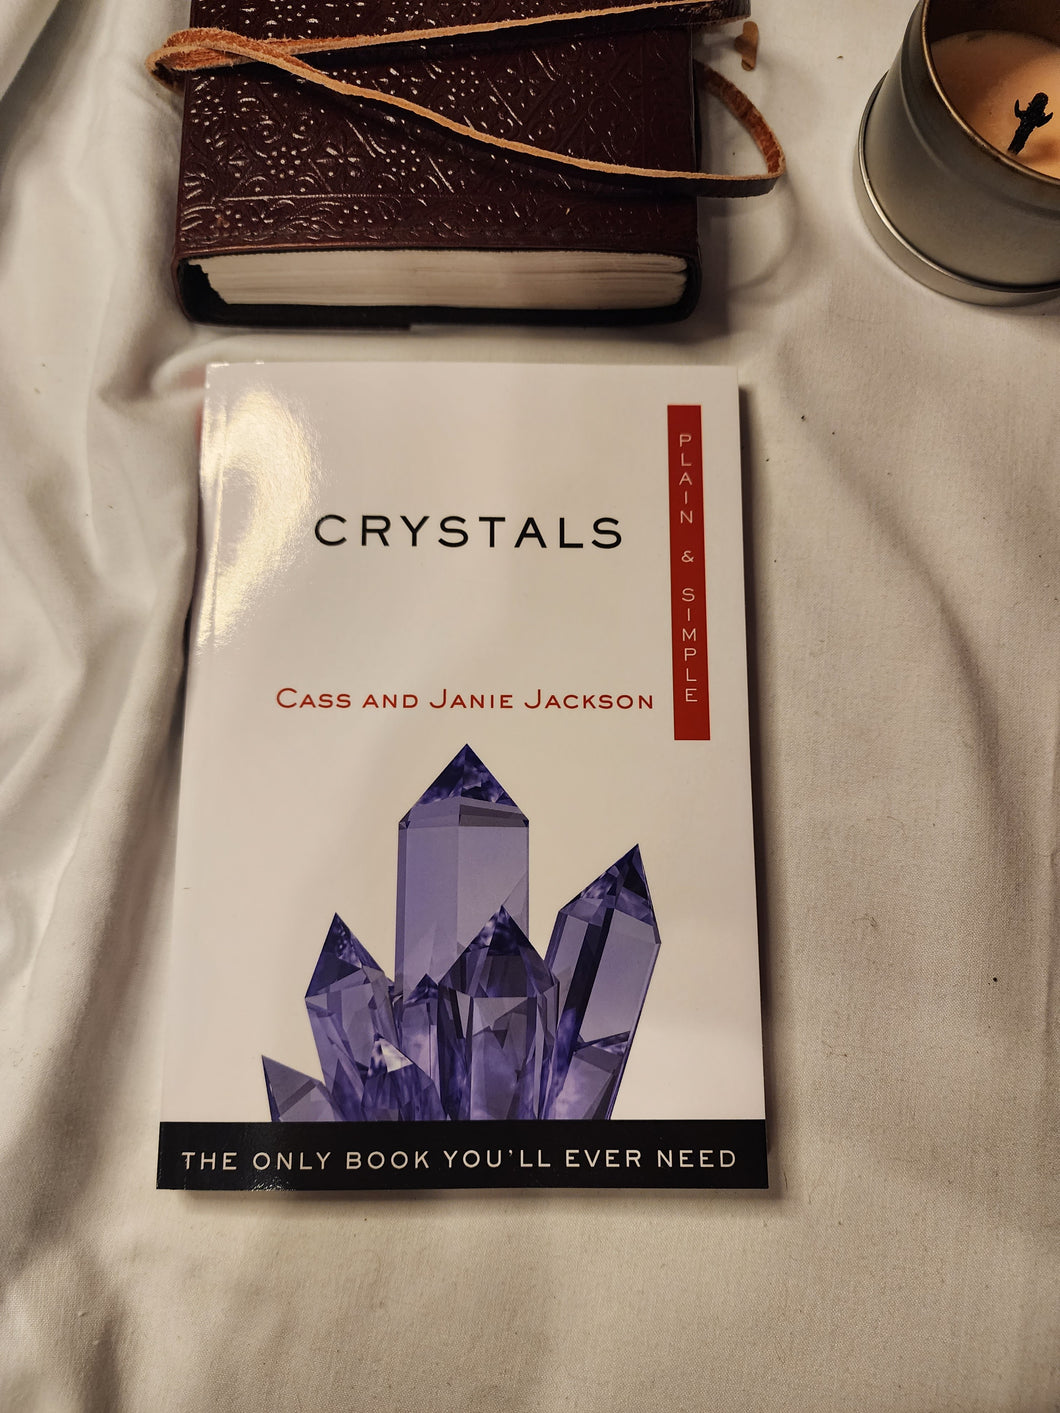 Crystals by Cass and Janice Jackson